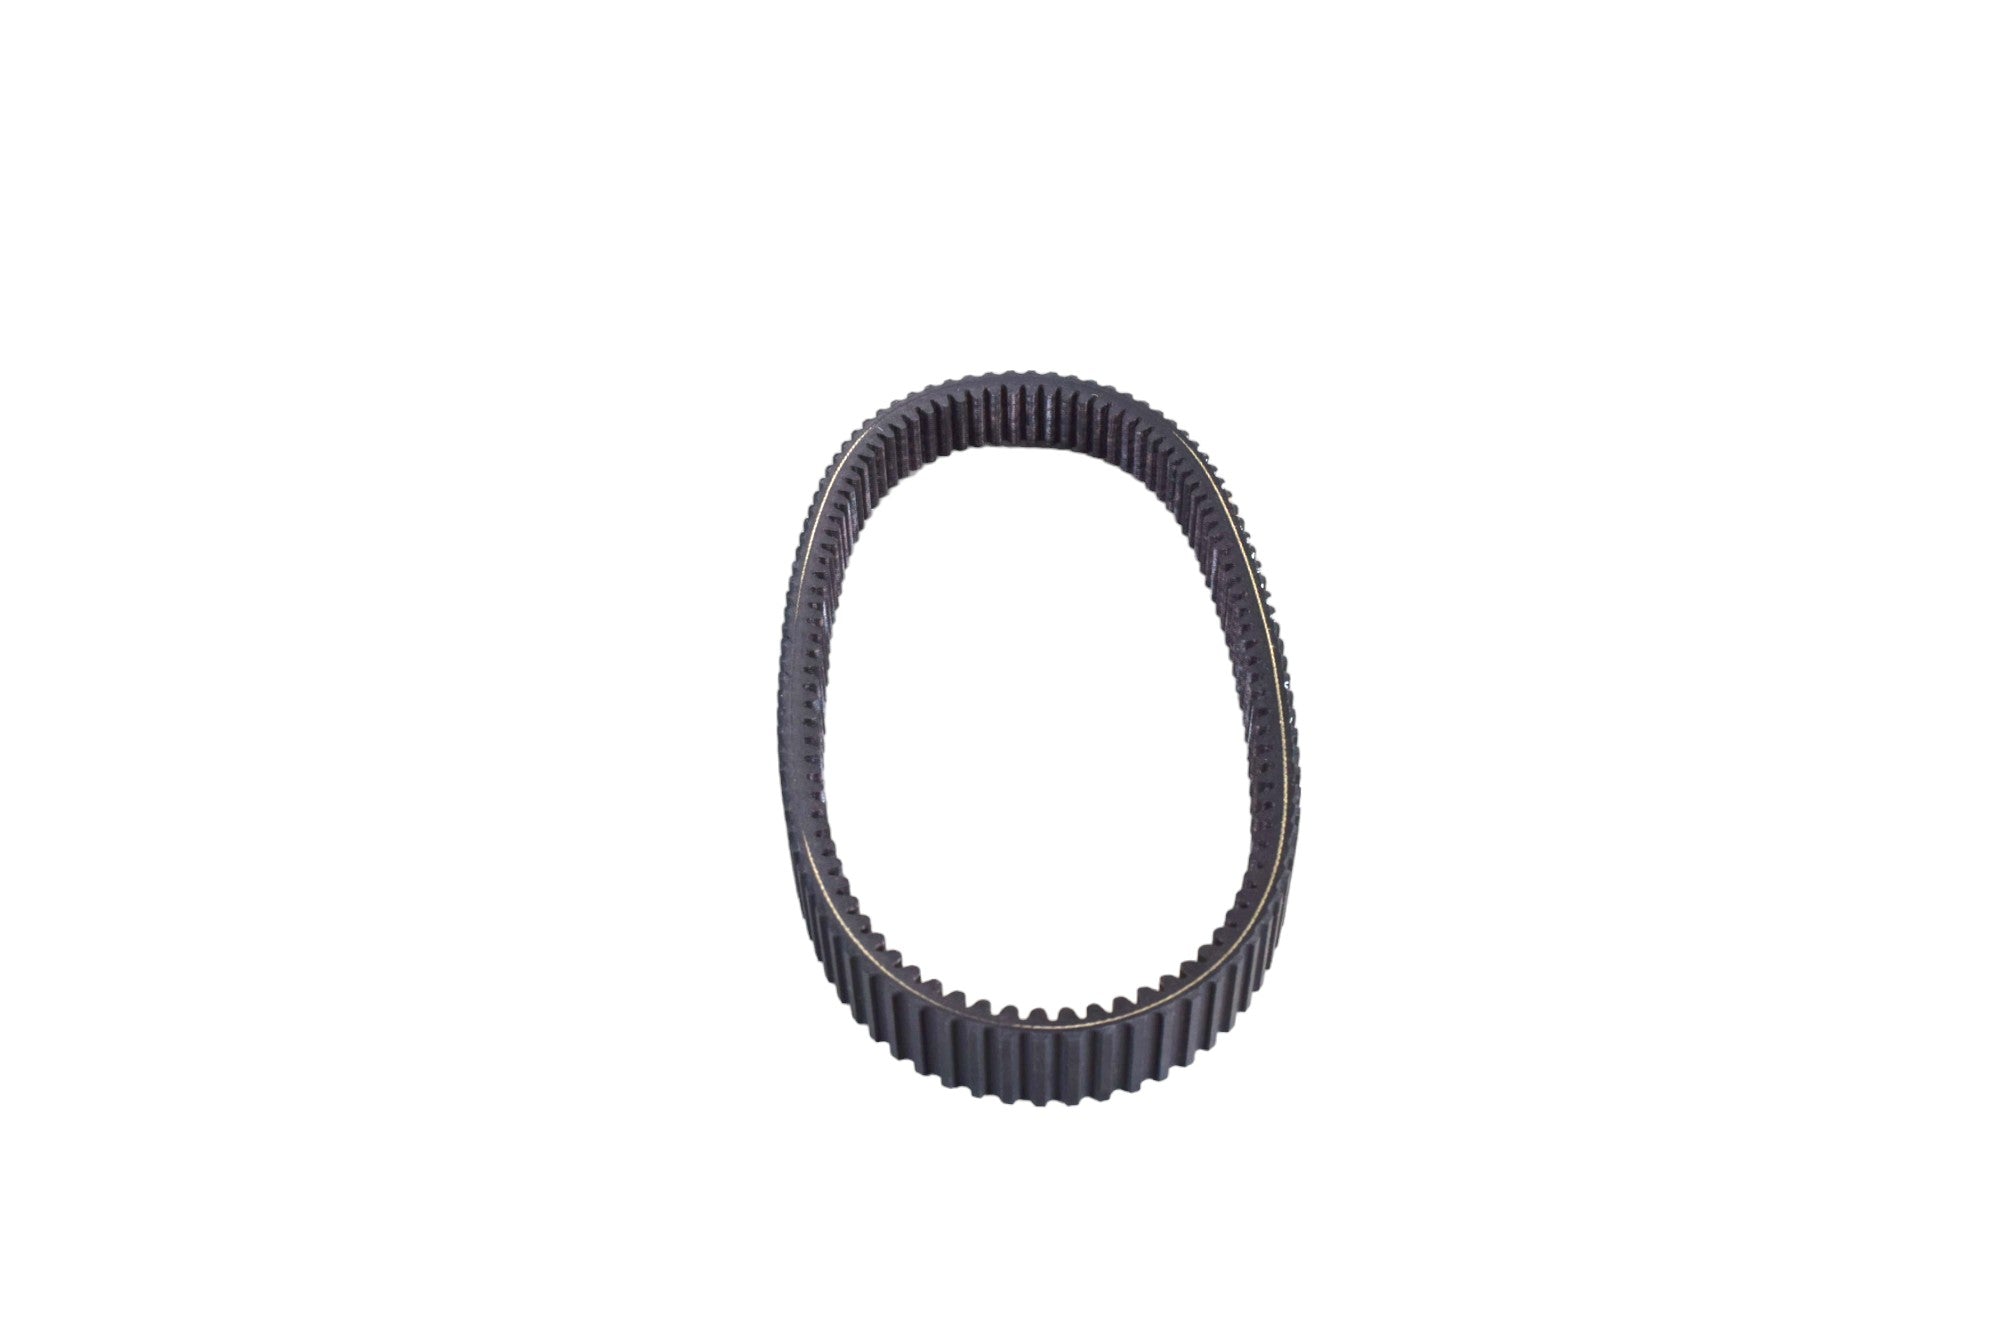 Ultimax UXP445 Drive Belt for Arctic Cat  OEM Replacement for 0823-231 (Made in USA)